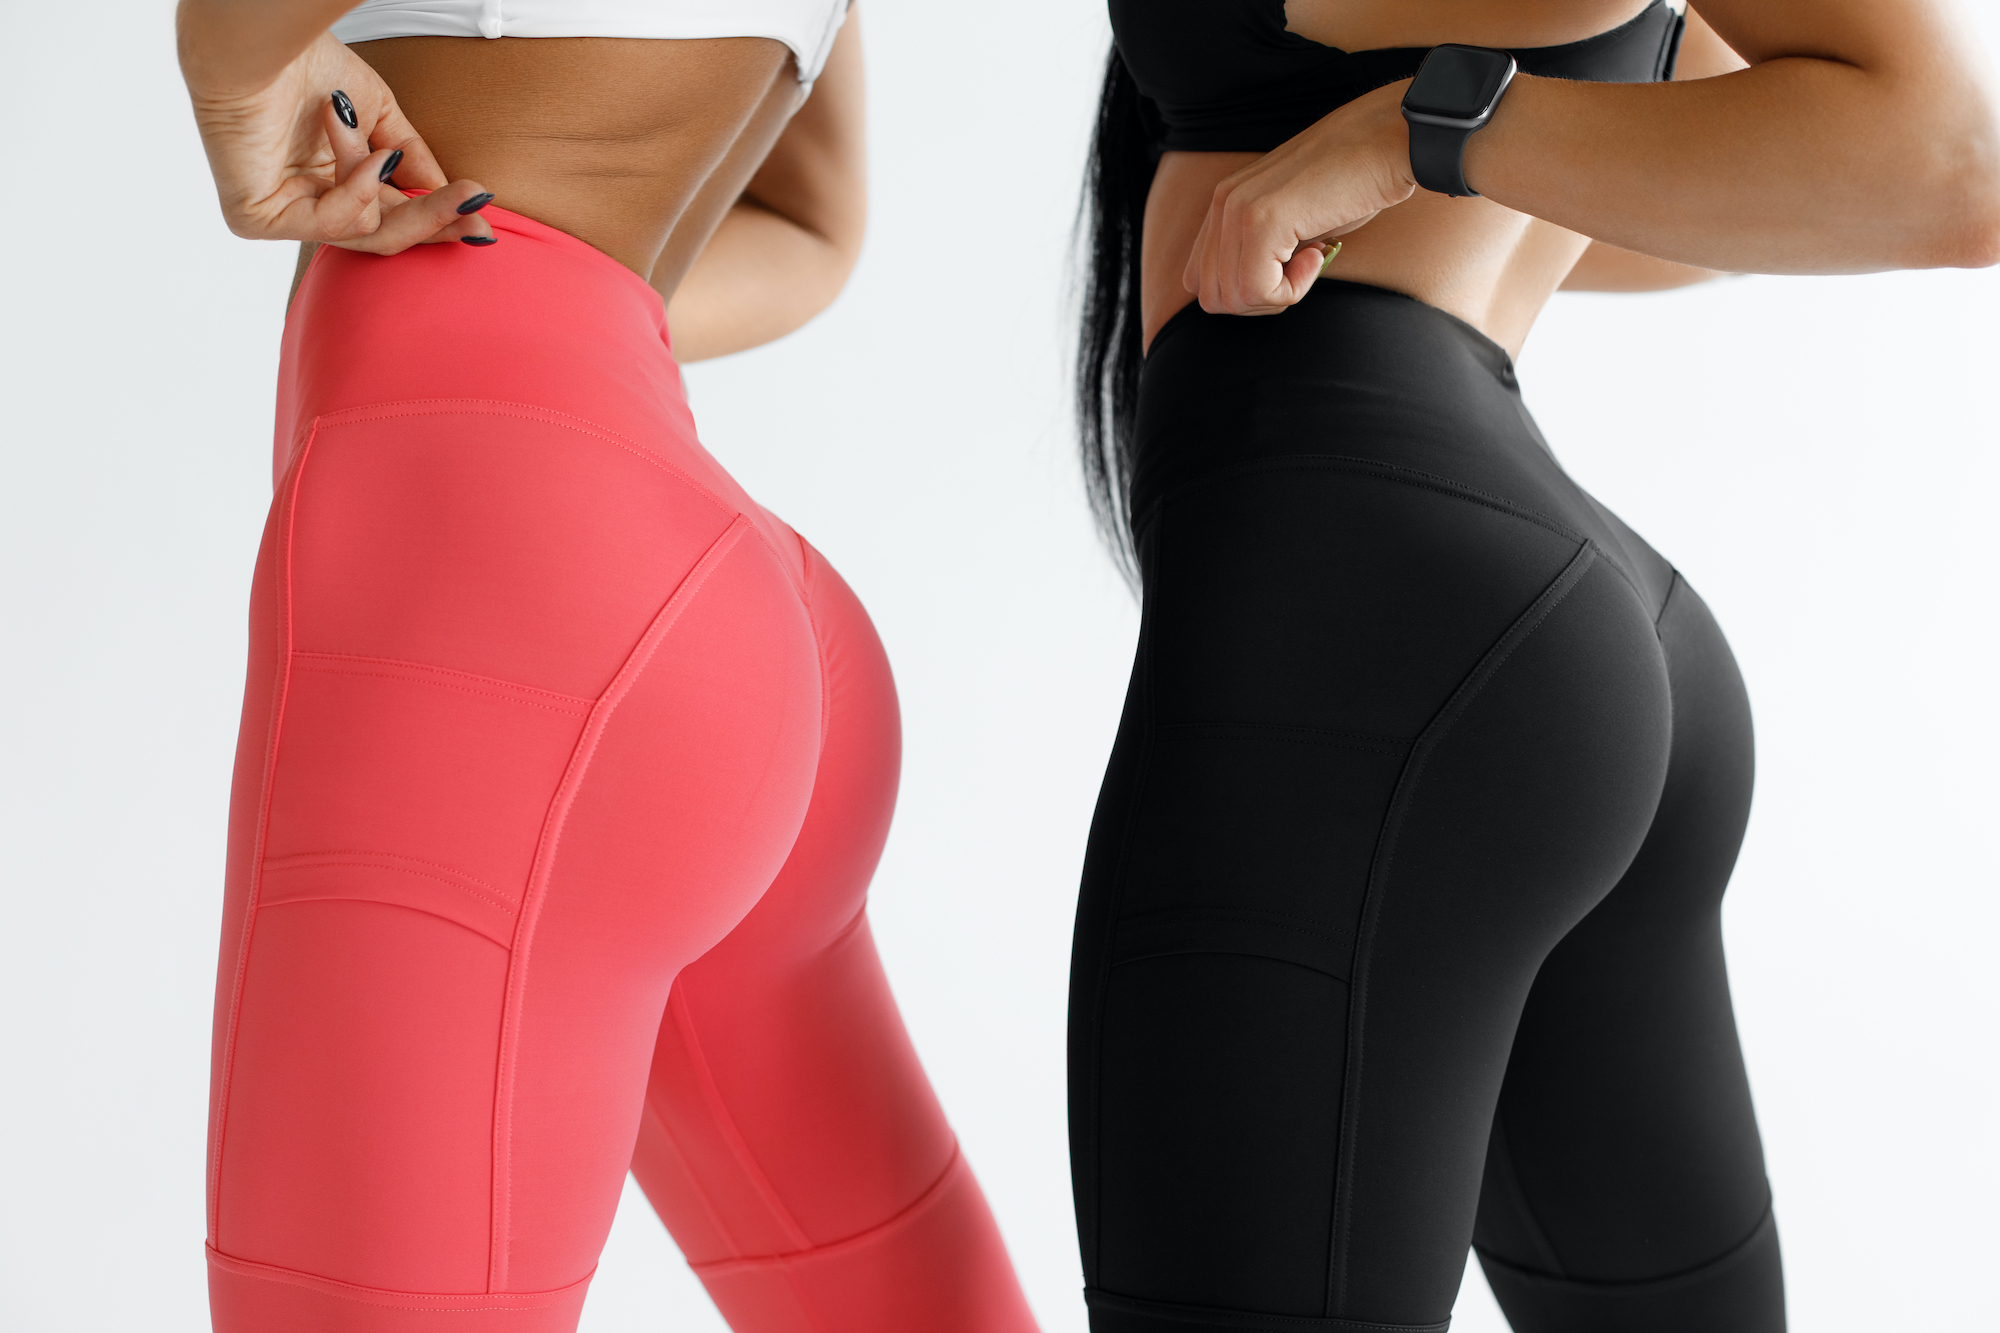 Shoppers Say These Butt-Lifting Pants Are Smoothing, and They're